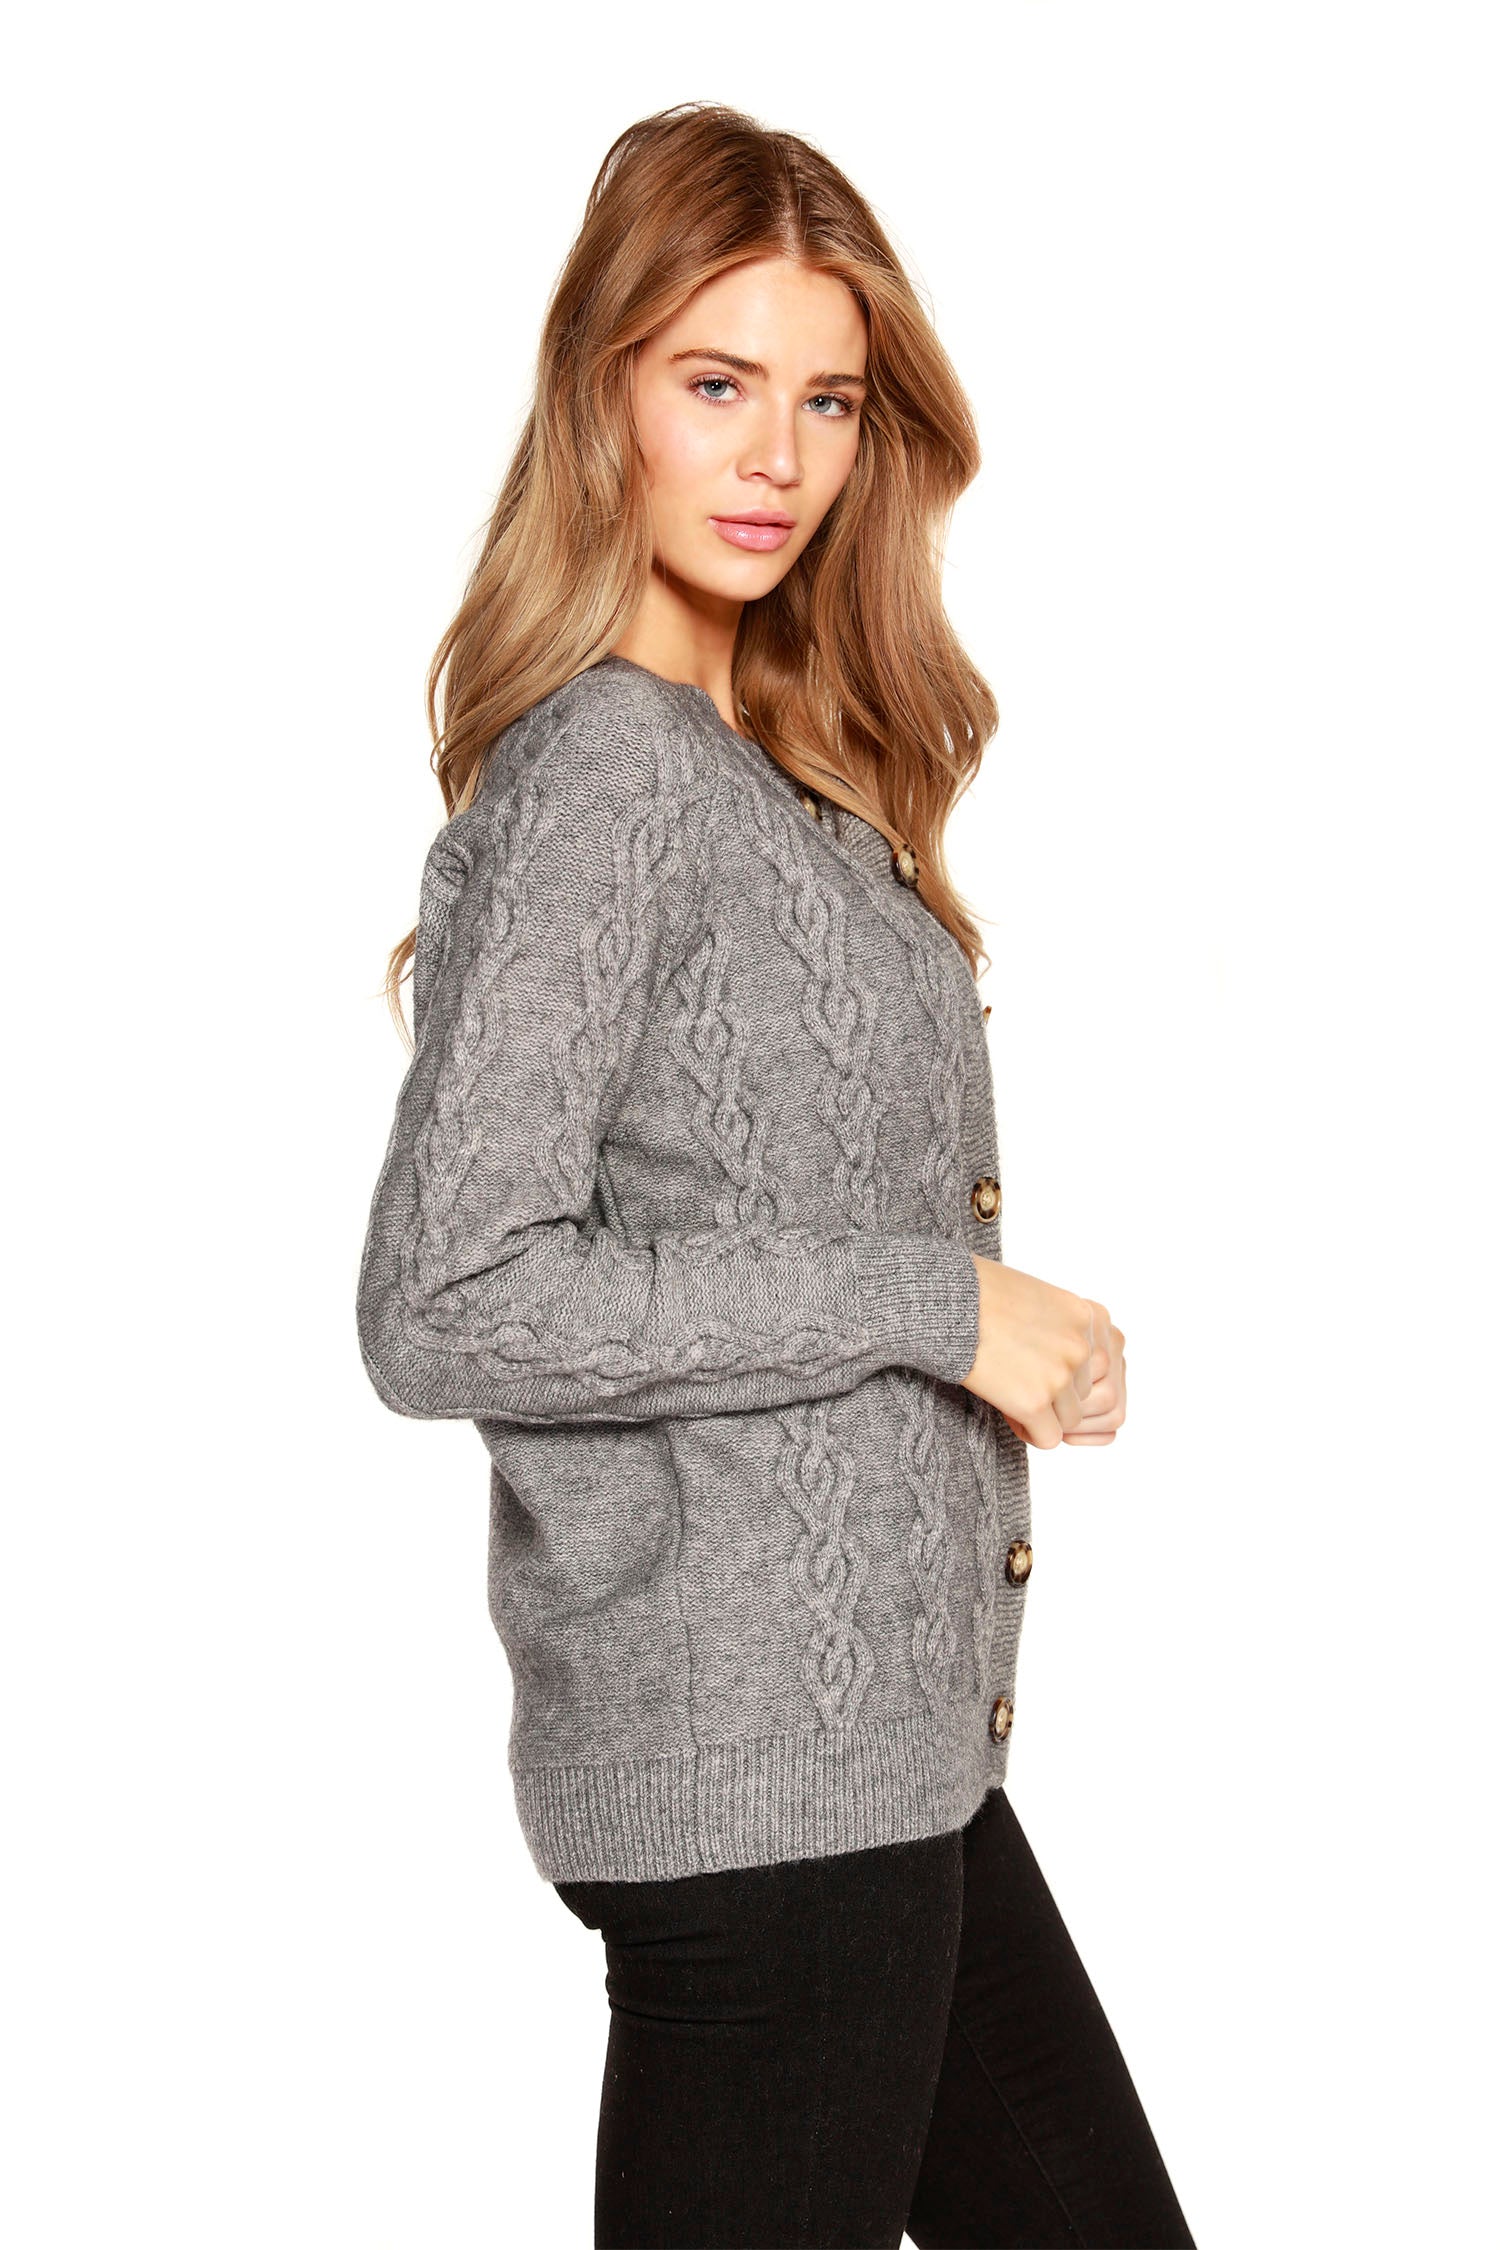 Womens Long Sleeve Button Down Cable Knit Sweater for Ladies Hip Length